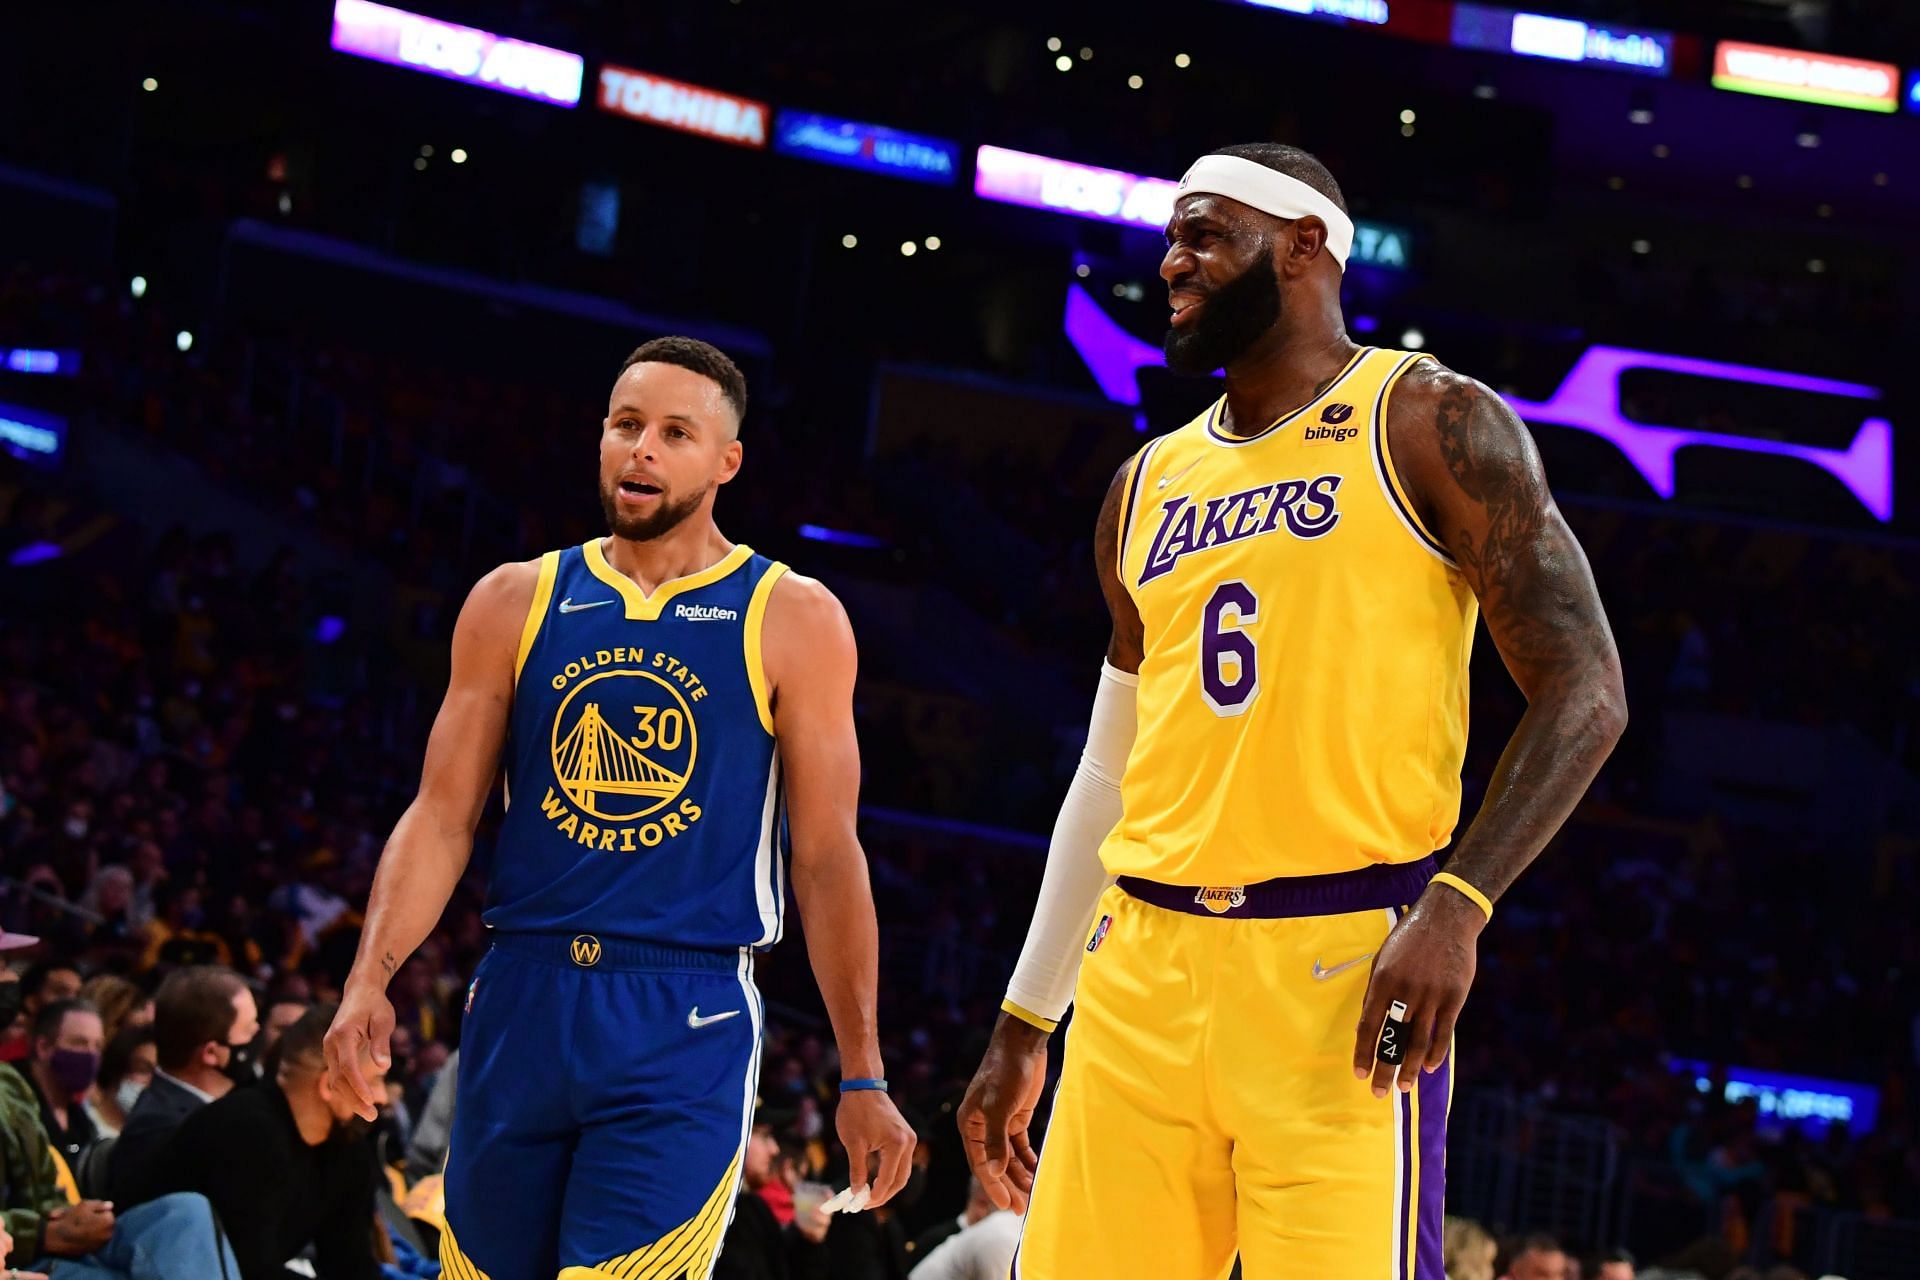 Stephen Curry of the Golden State Warriors and LeBron James of the Los Angeles Lakers